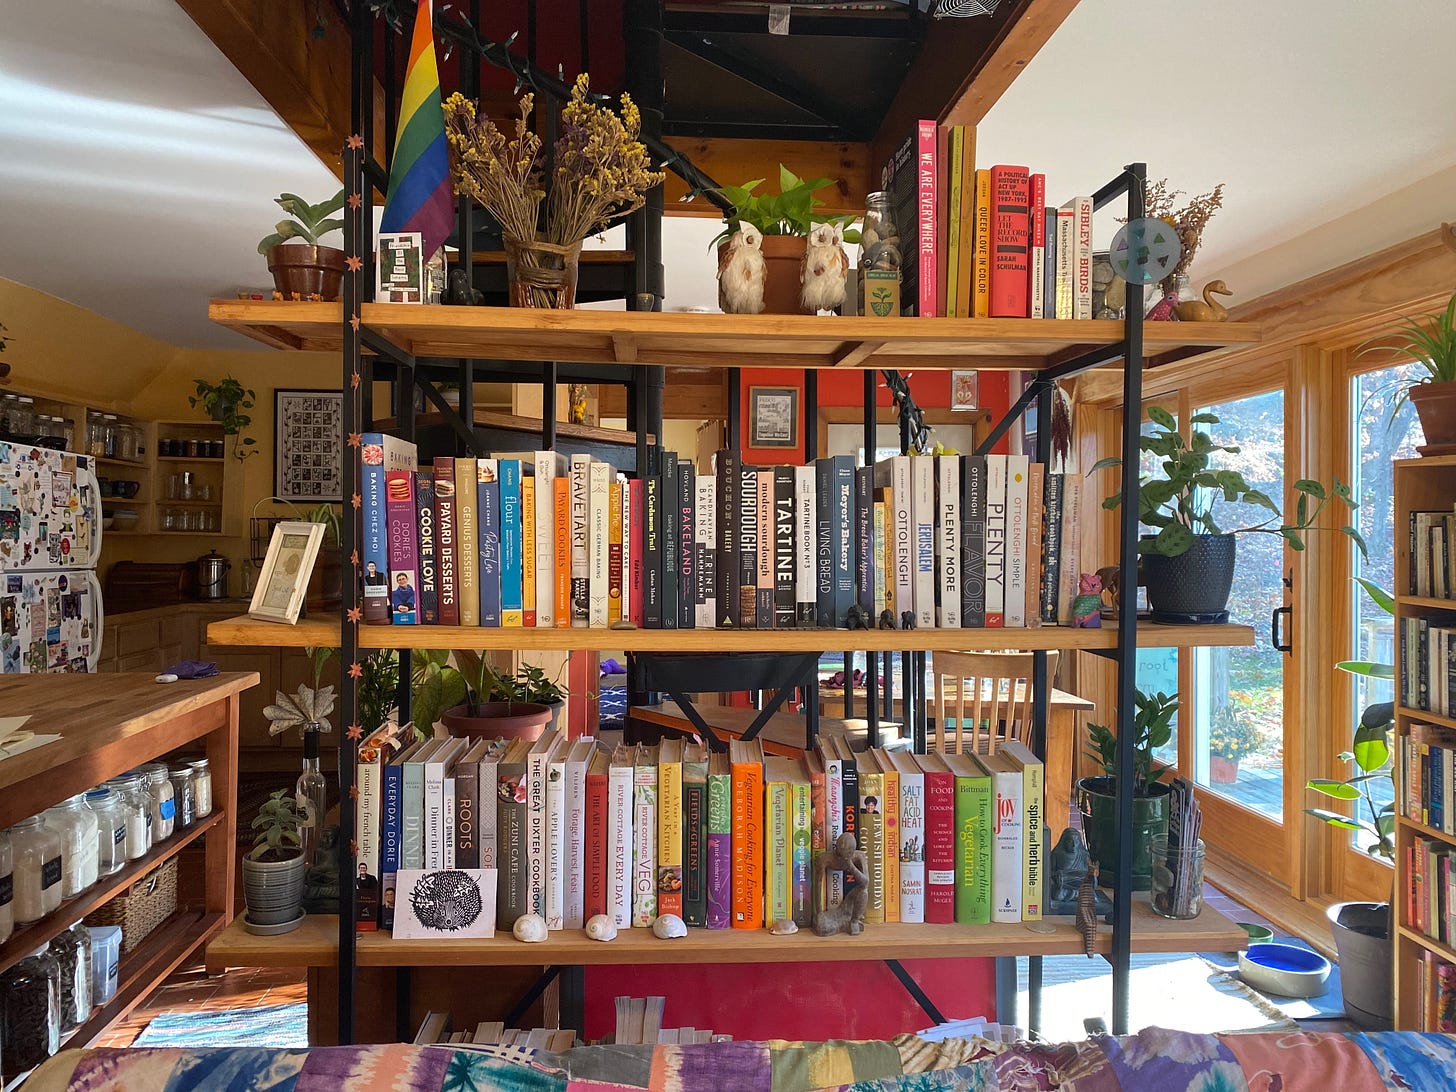 An open wooden bookshelf full of colorful cookbooks and knickknacks—plants, a rainbow flag, two owl figurines, a van of dried flours, shells, and cards. The shelf is in the middle of an open room, with a view into the kitchen on one side and out the sliding glass doors on the other.